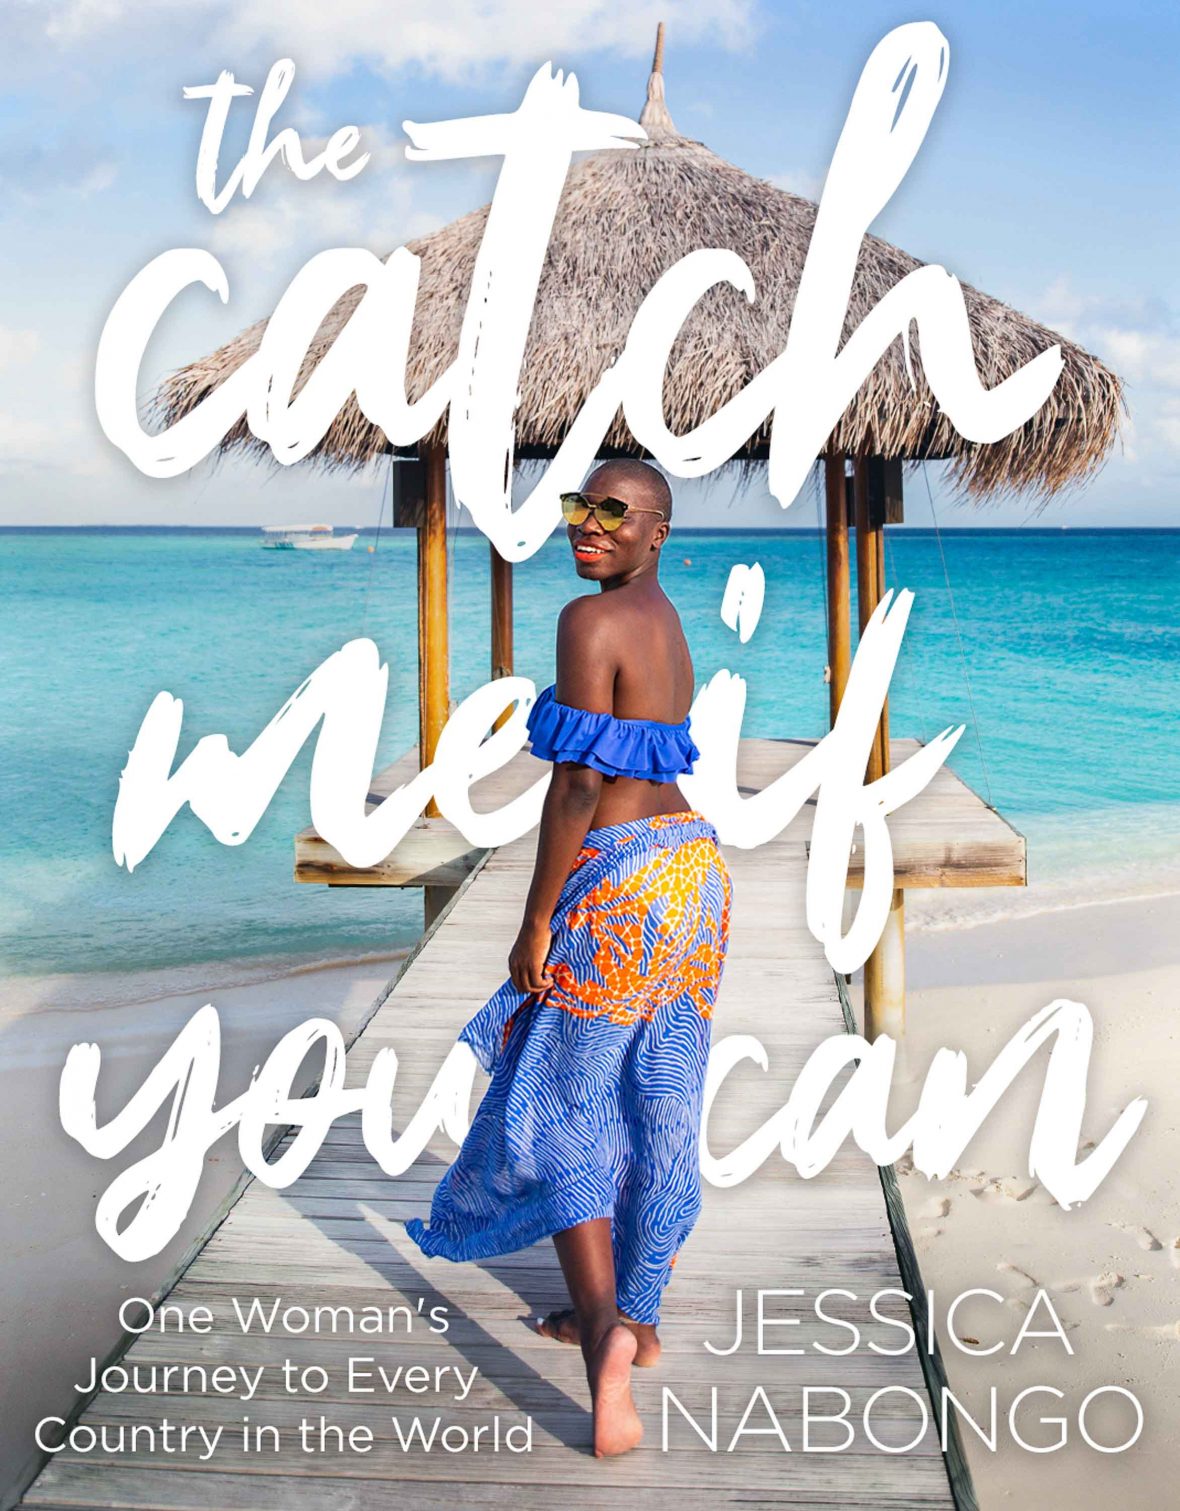 A book cover with Jessica on a sandy beach with clear blue water.